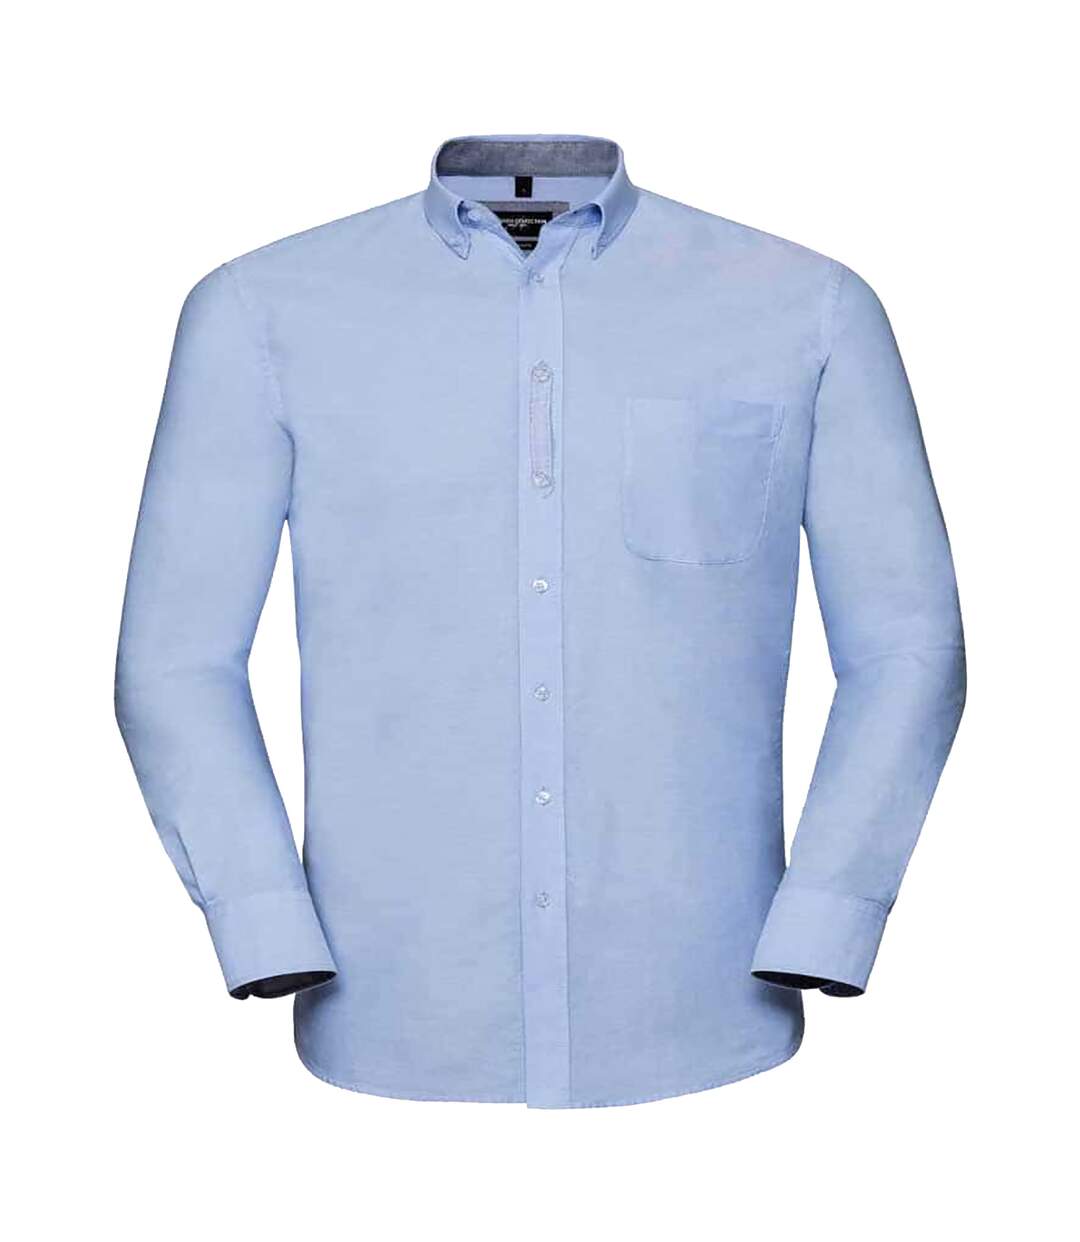 Russell Collection Chemise Oxford à manches longues pour hommes (Bleu Oxford/Navy Oxford) - UTRW7047